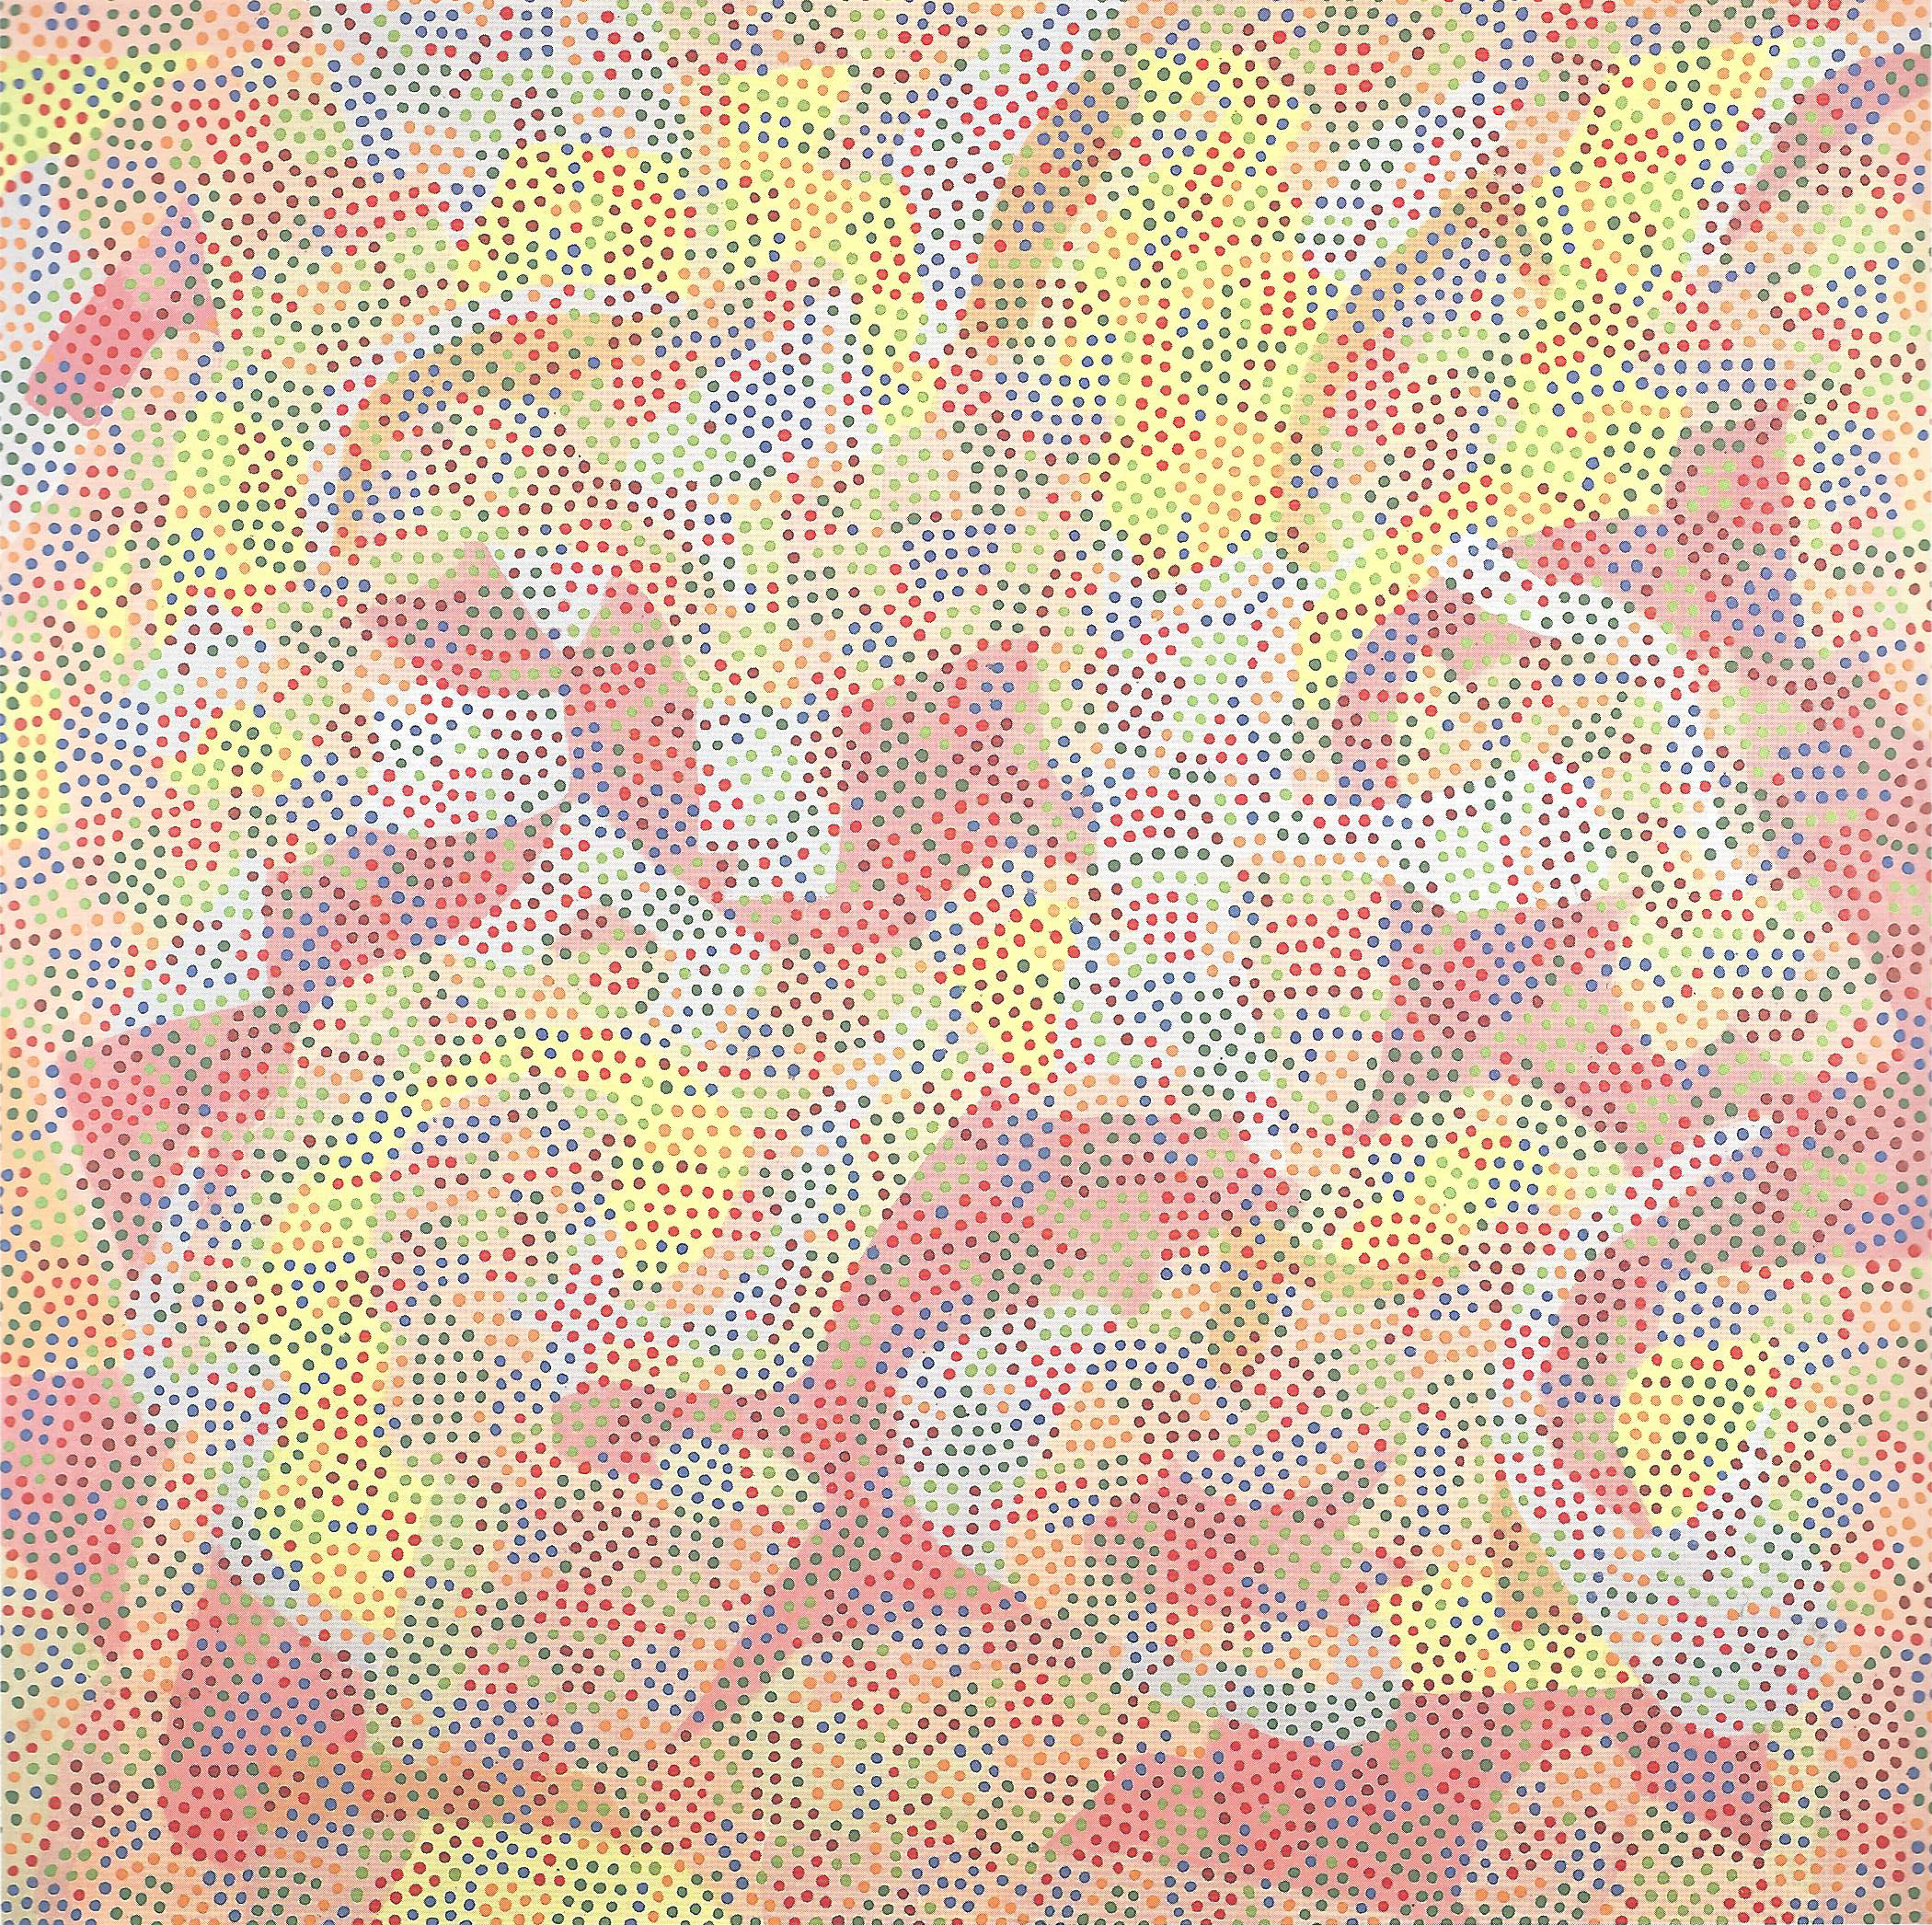  Peter Young,  #4- 1971 , 1971, acrylic on canvas, 75 x 75 inches (190.5 x 190.5 cm) 